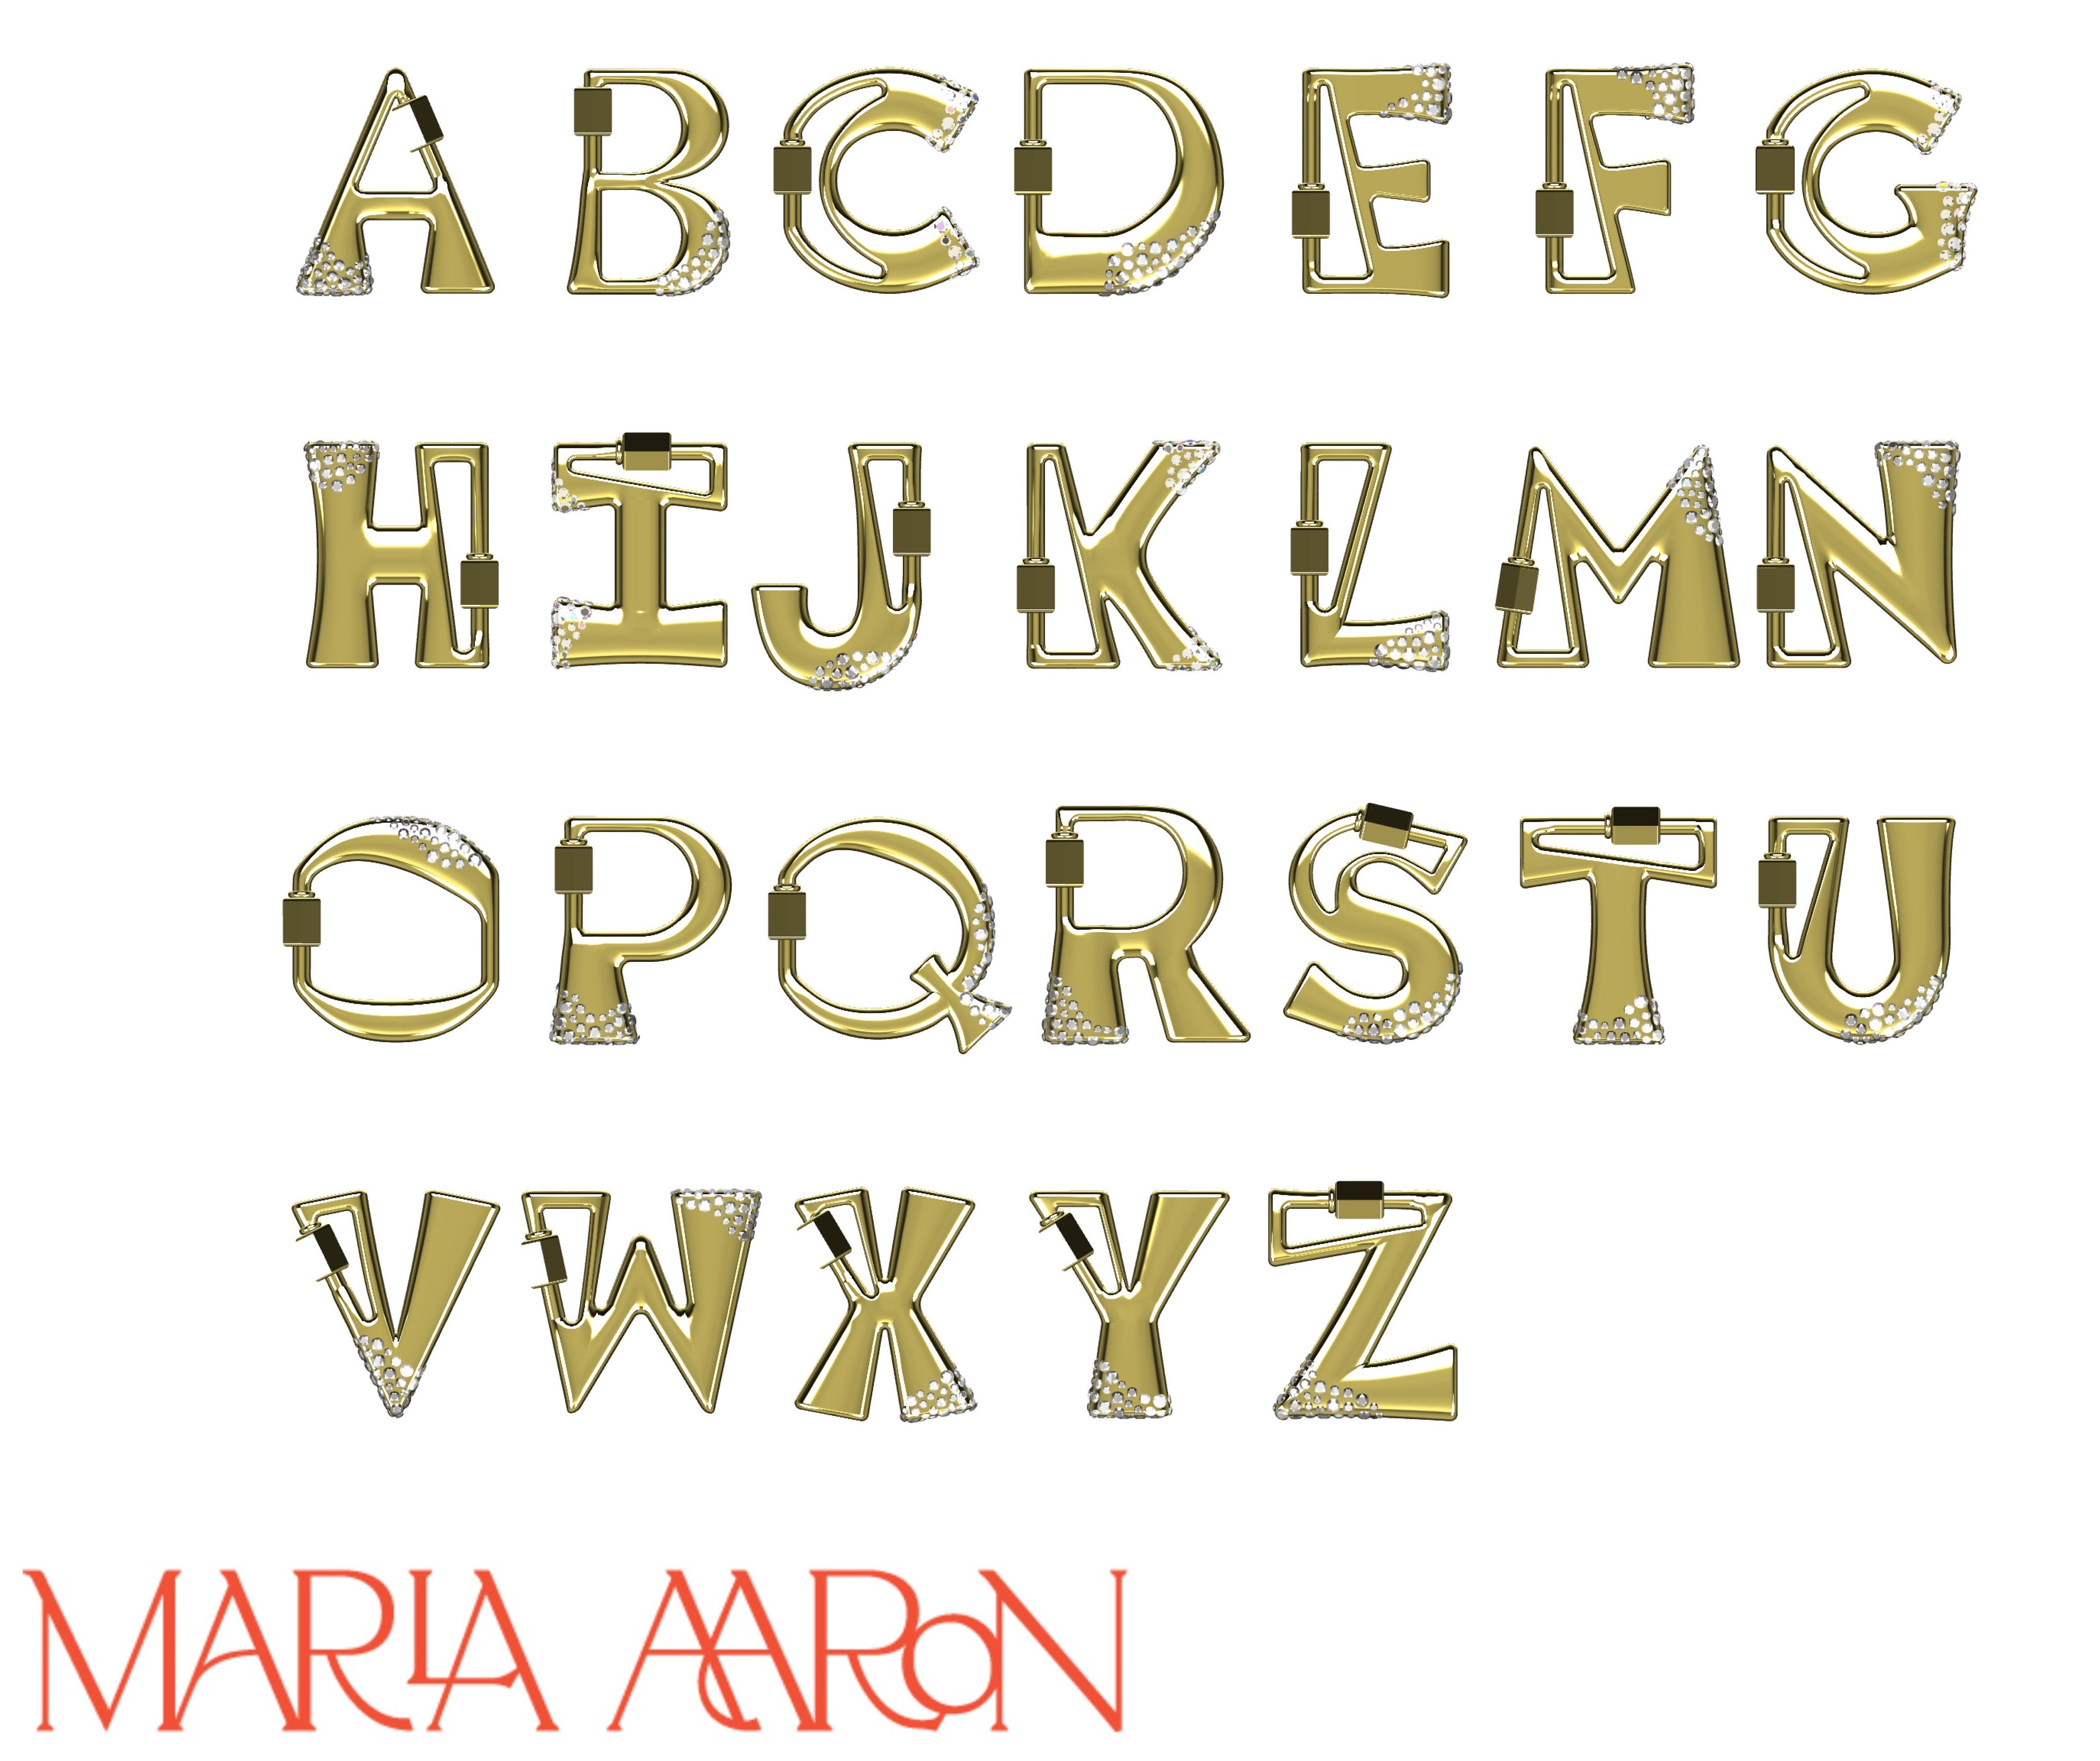 Gold locks of every letter of the alphabet including K charm against white backdrop with Marla Aaron logo in bottom left corner